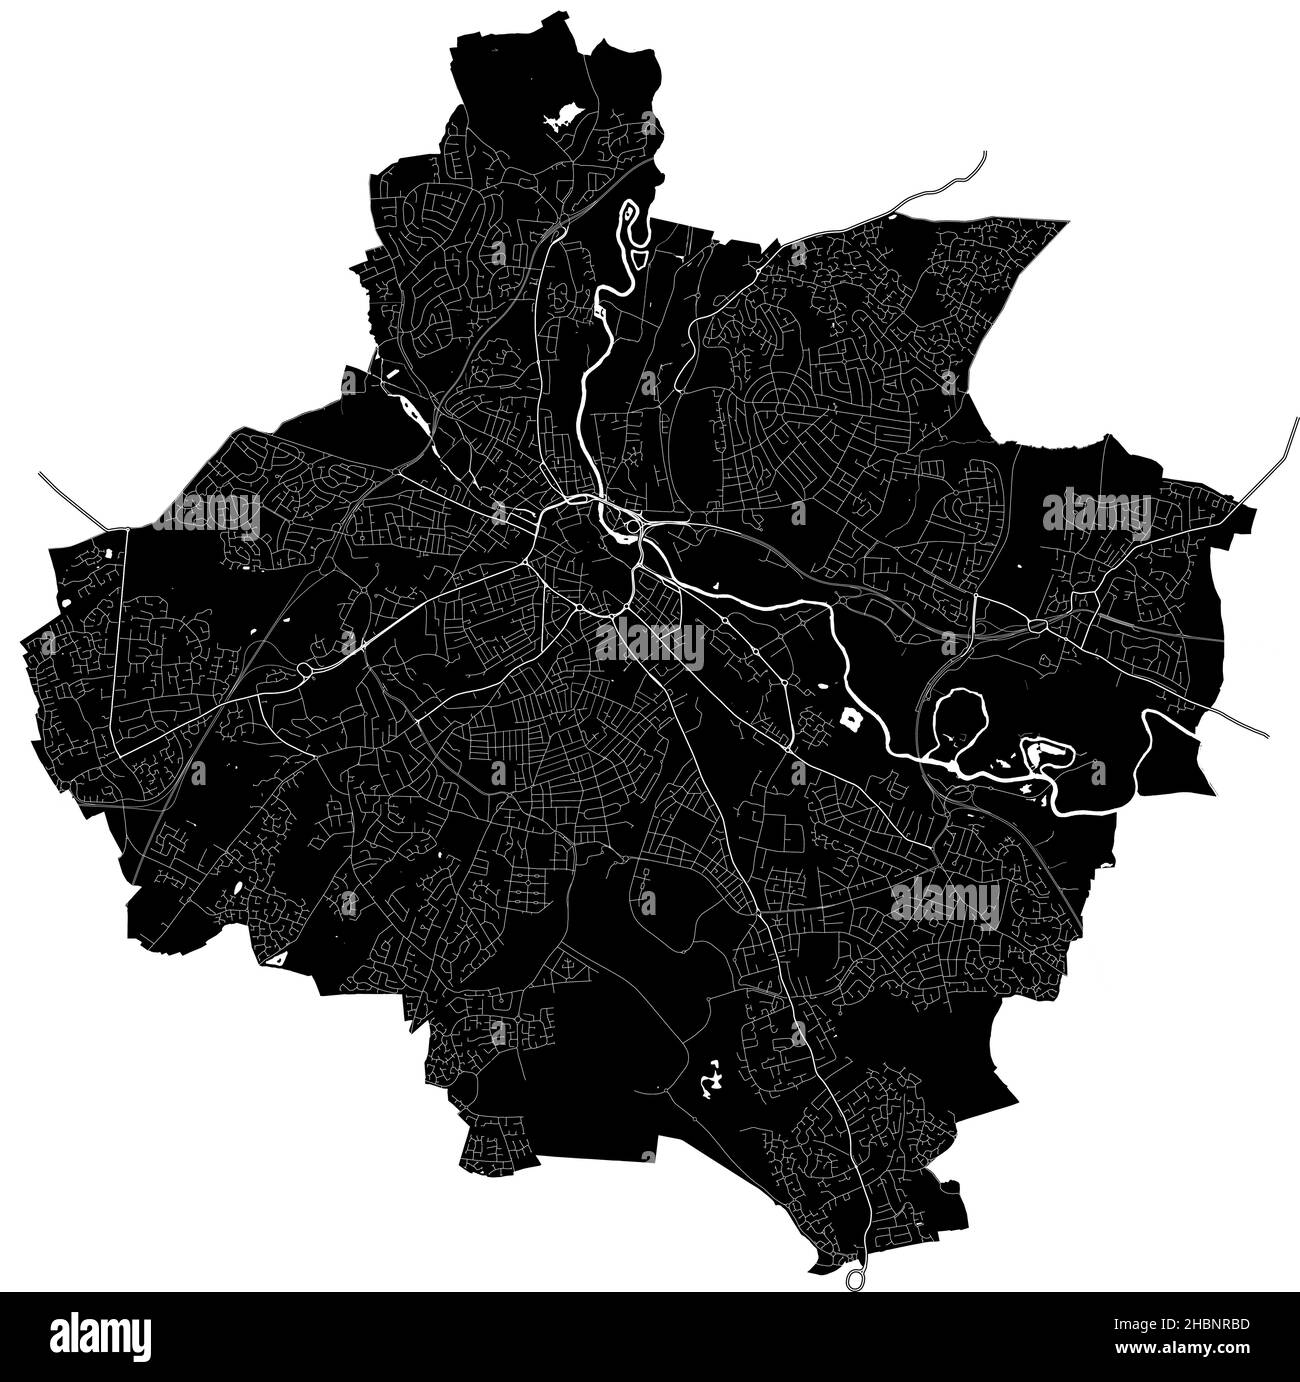 Derby, England, high resolution vector map with city boundaries, and editable paths. The city map was drawn with white areas and lines for main roads, Stock Vector